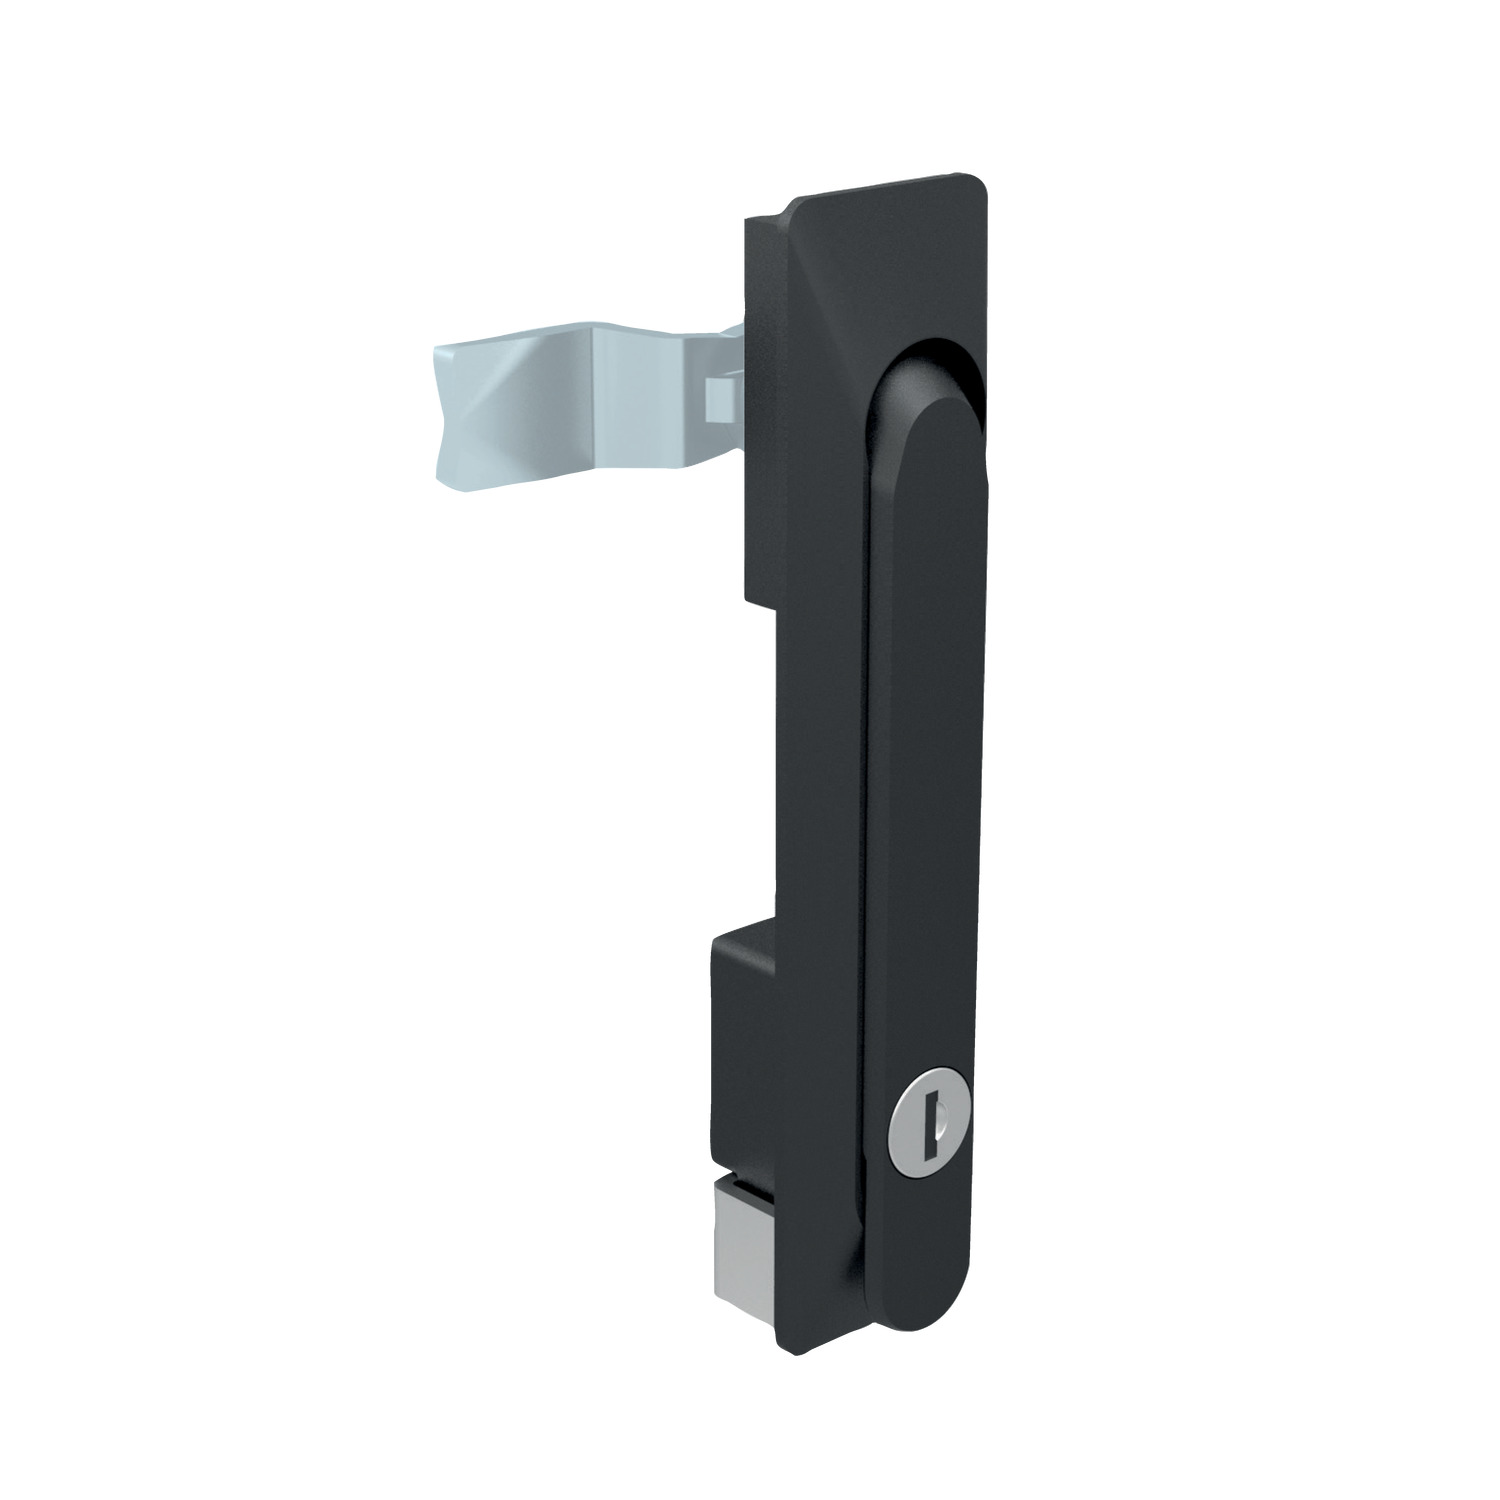 Swing Handles - Cam Control For attractive easy functional opening for and telecom and data cabinets as well as other industrial enclosures. Lock and handle in one attractive design. 